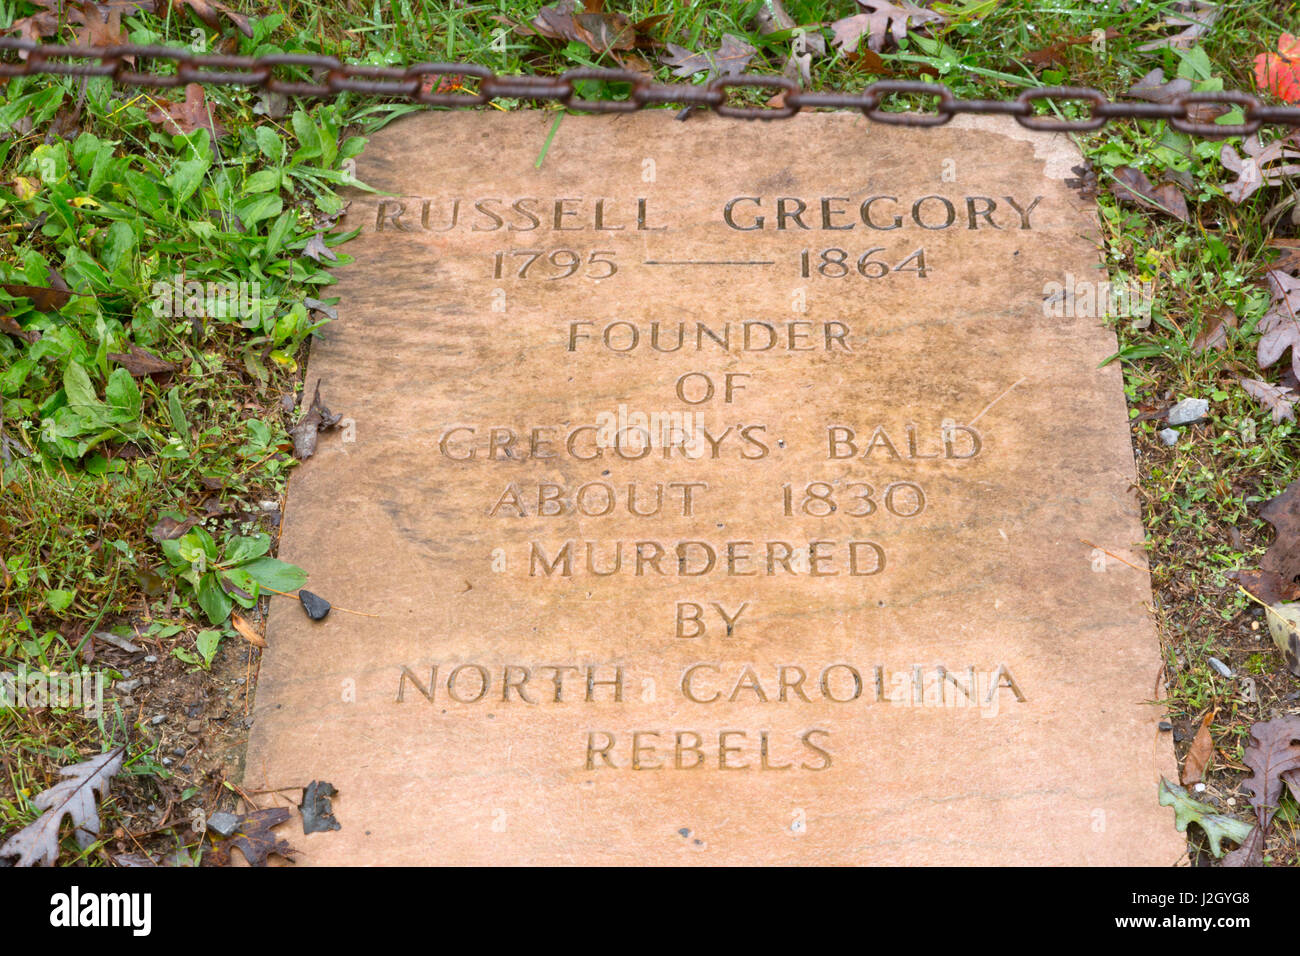 Mountain Empire Pet Cemetery in Bristol, Tennessee - Find a Grave